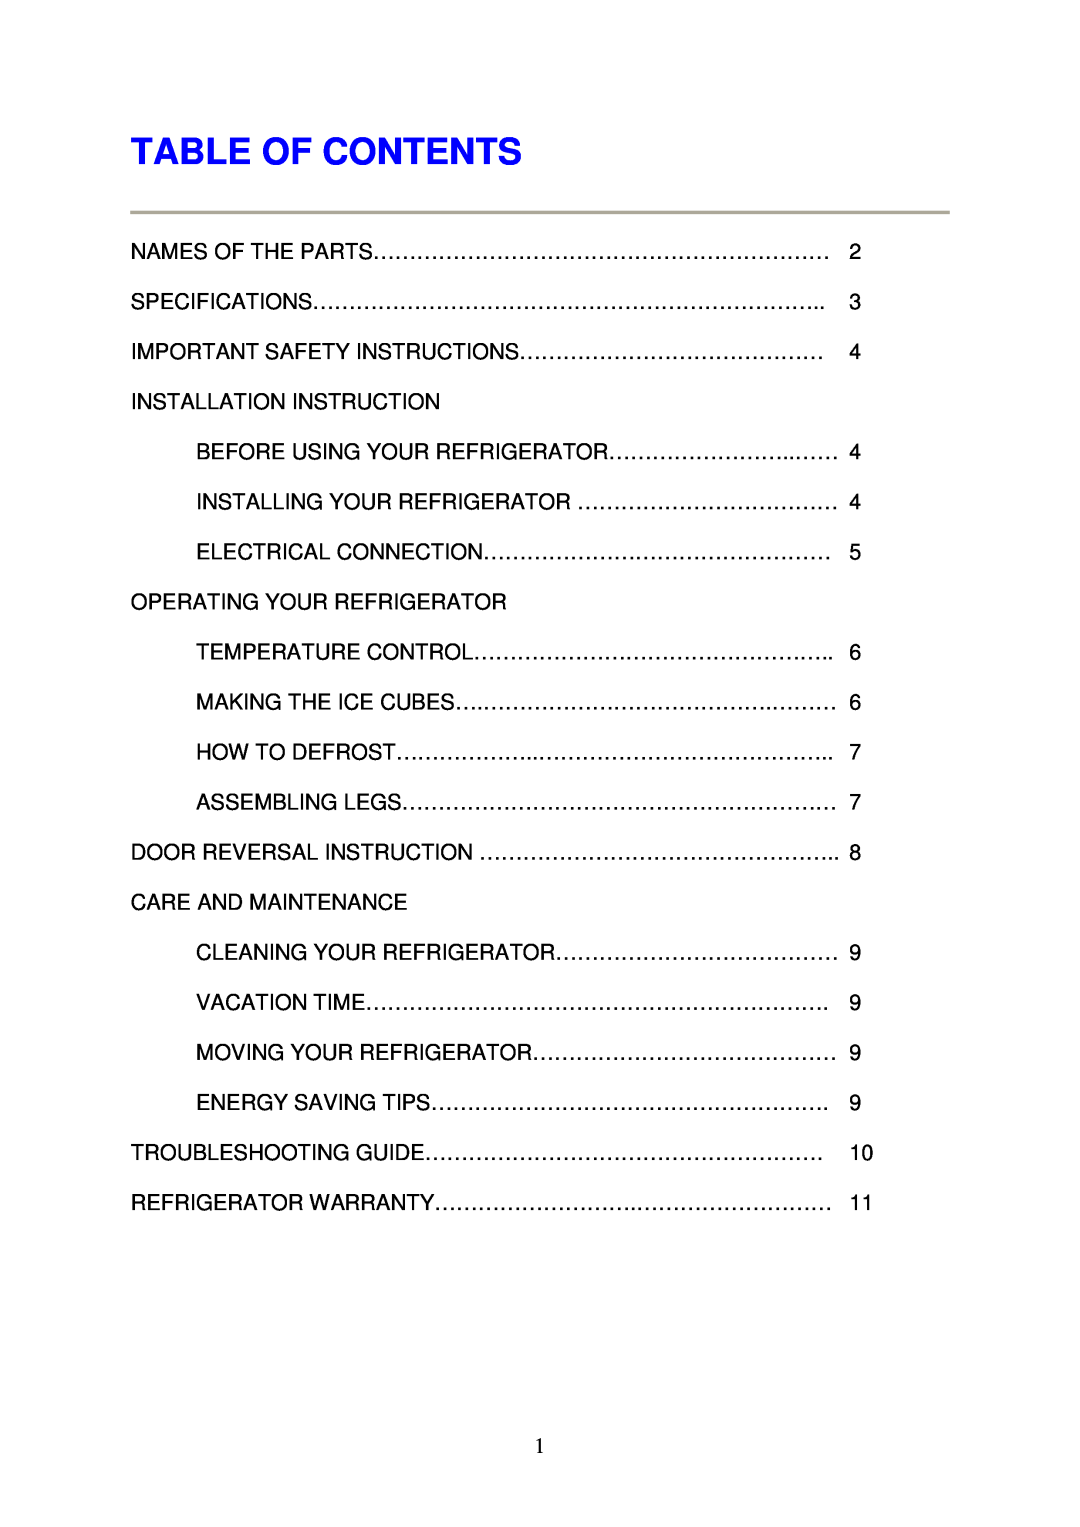 Magic Chef MCBR460S instruction manual Table Of Contents 